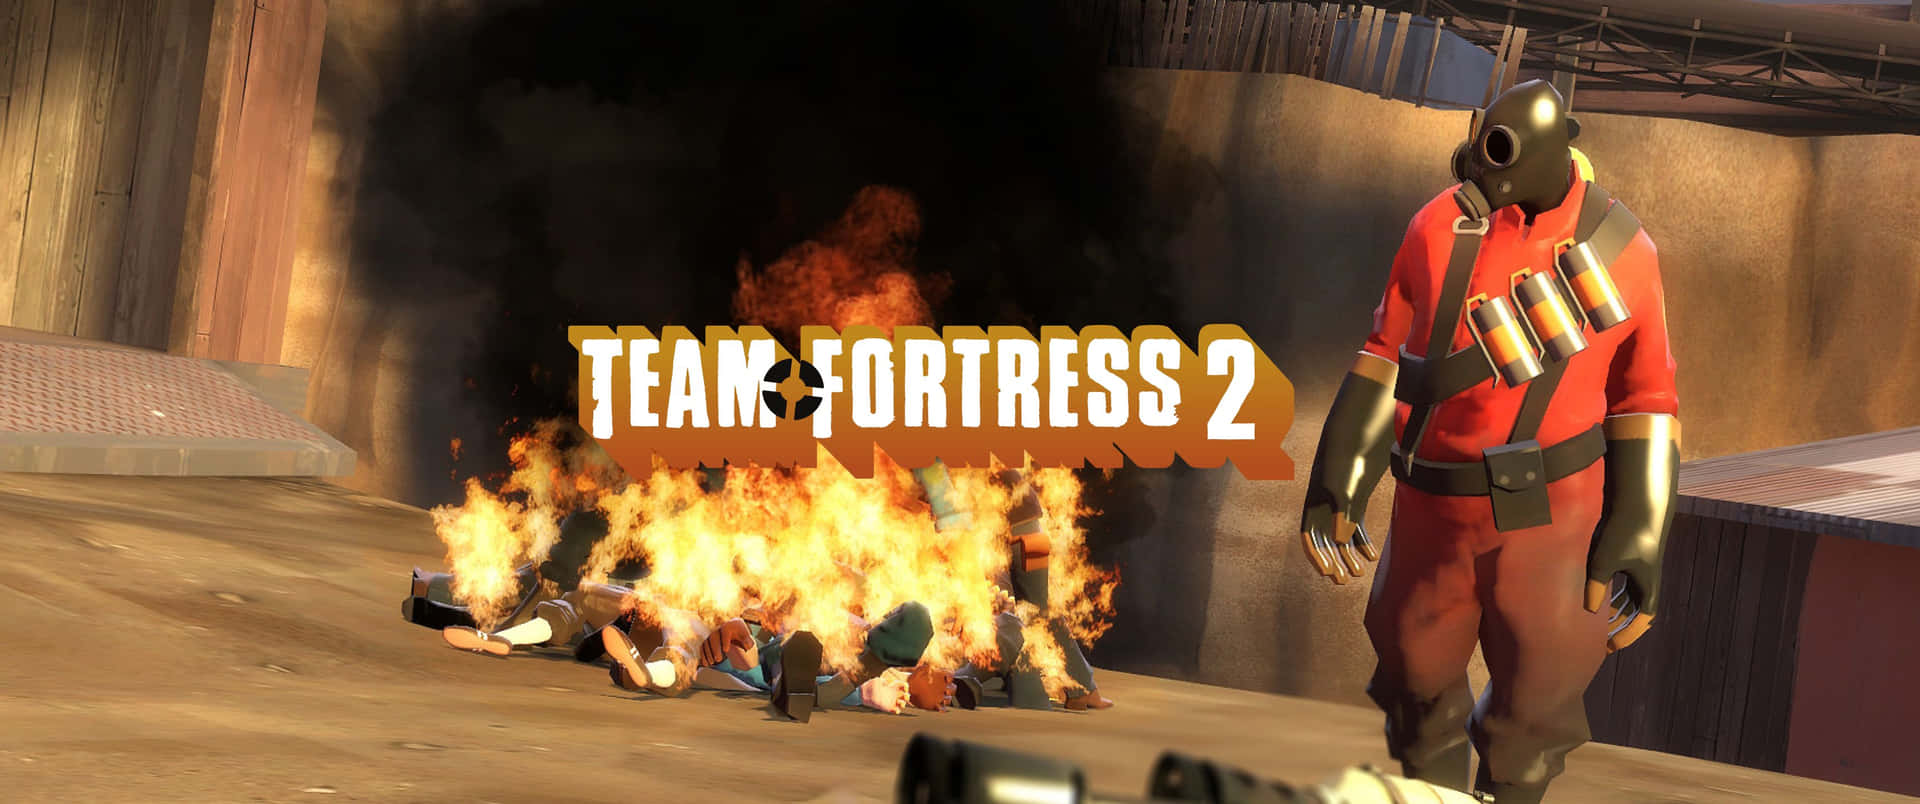 Get in the fray with this Team Fortress 2 3440x1440p wallpaper